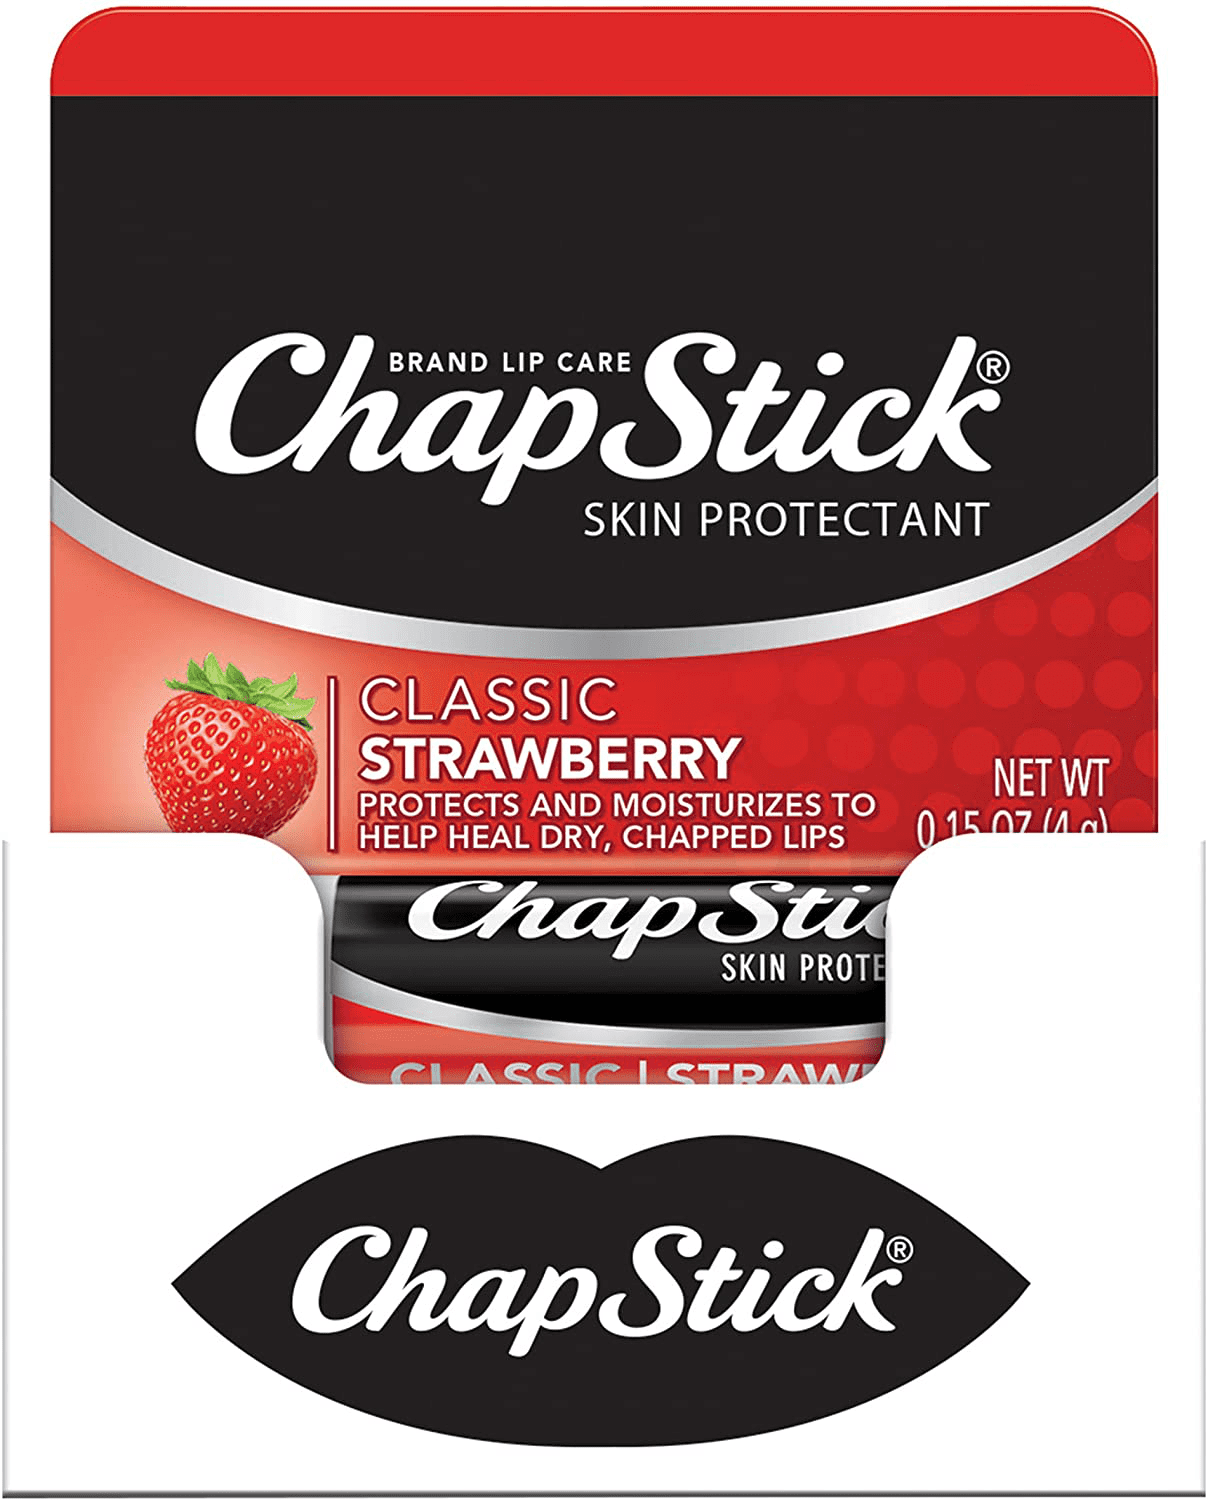 for sale online ChapStick Classic Strawberry Skin Protectant Sunscreen SPF 12 .15 Oz 